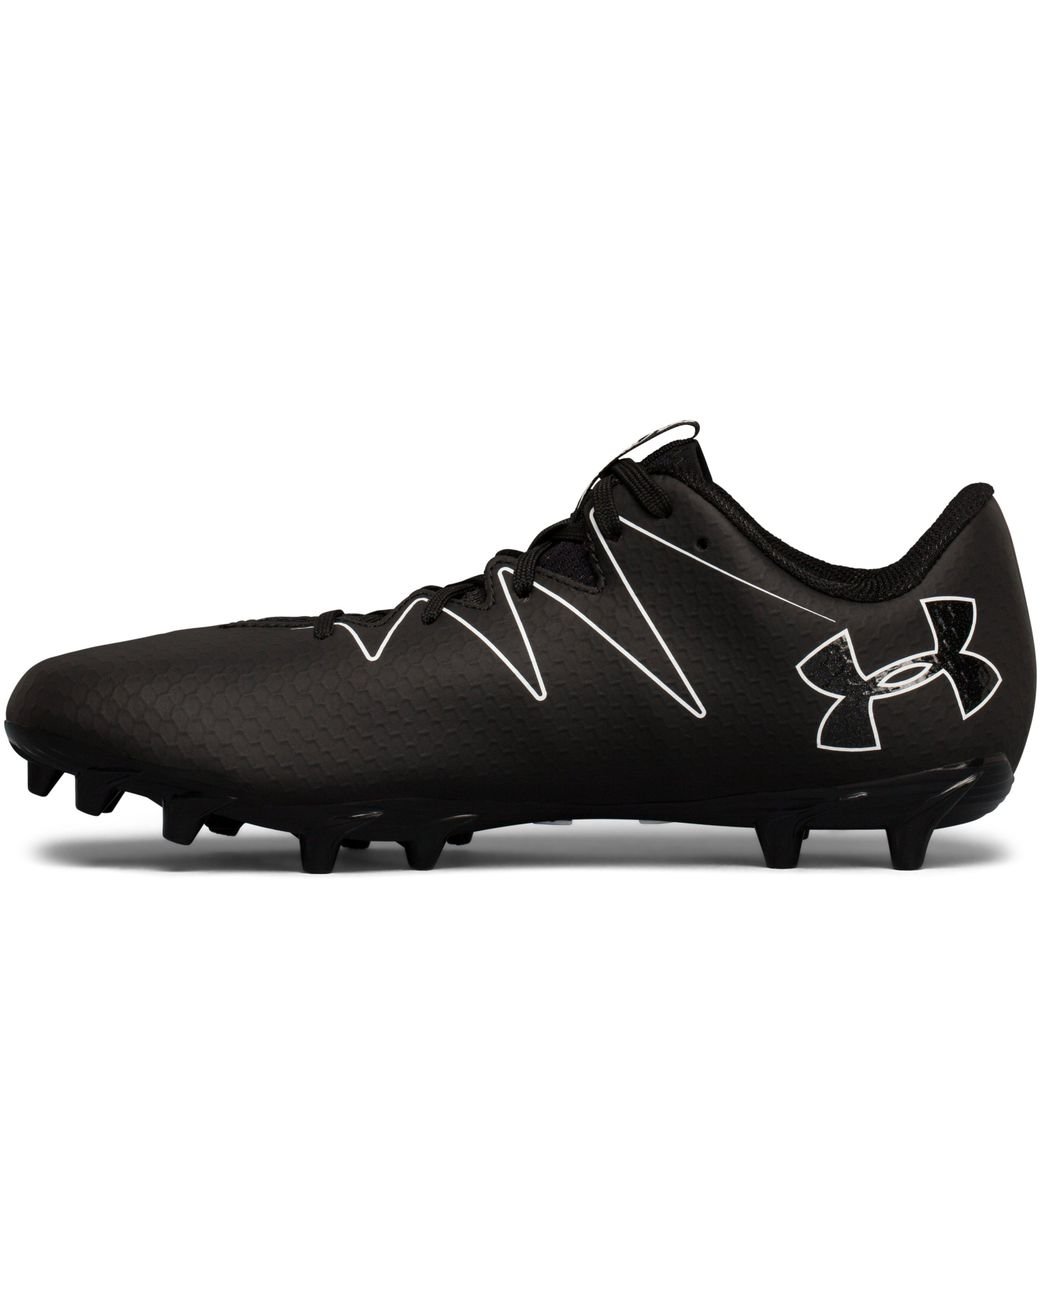 Under Armour Men's Ua Nitro Low Mc Football Cleats in Black for 